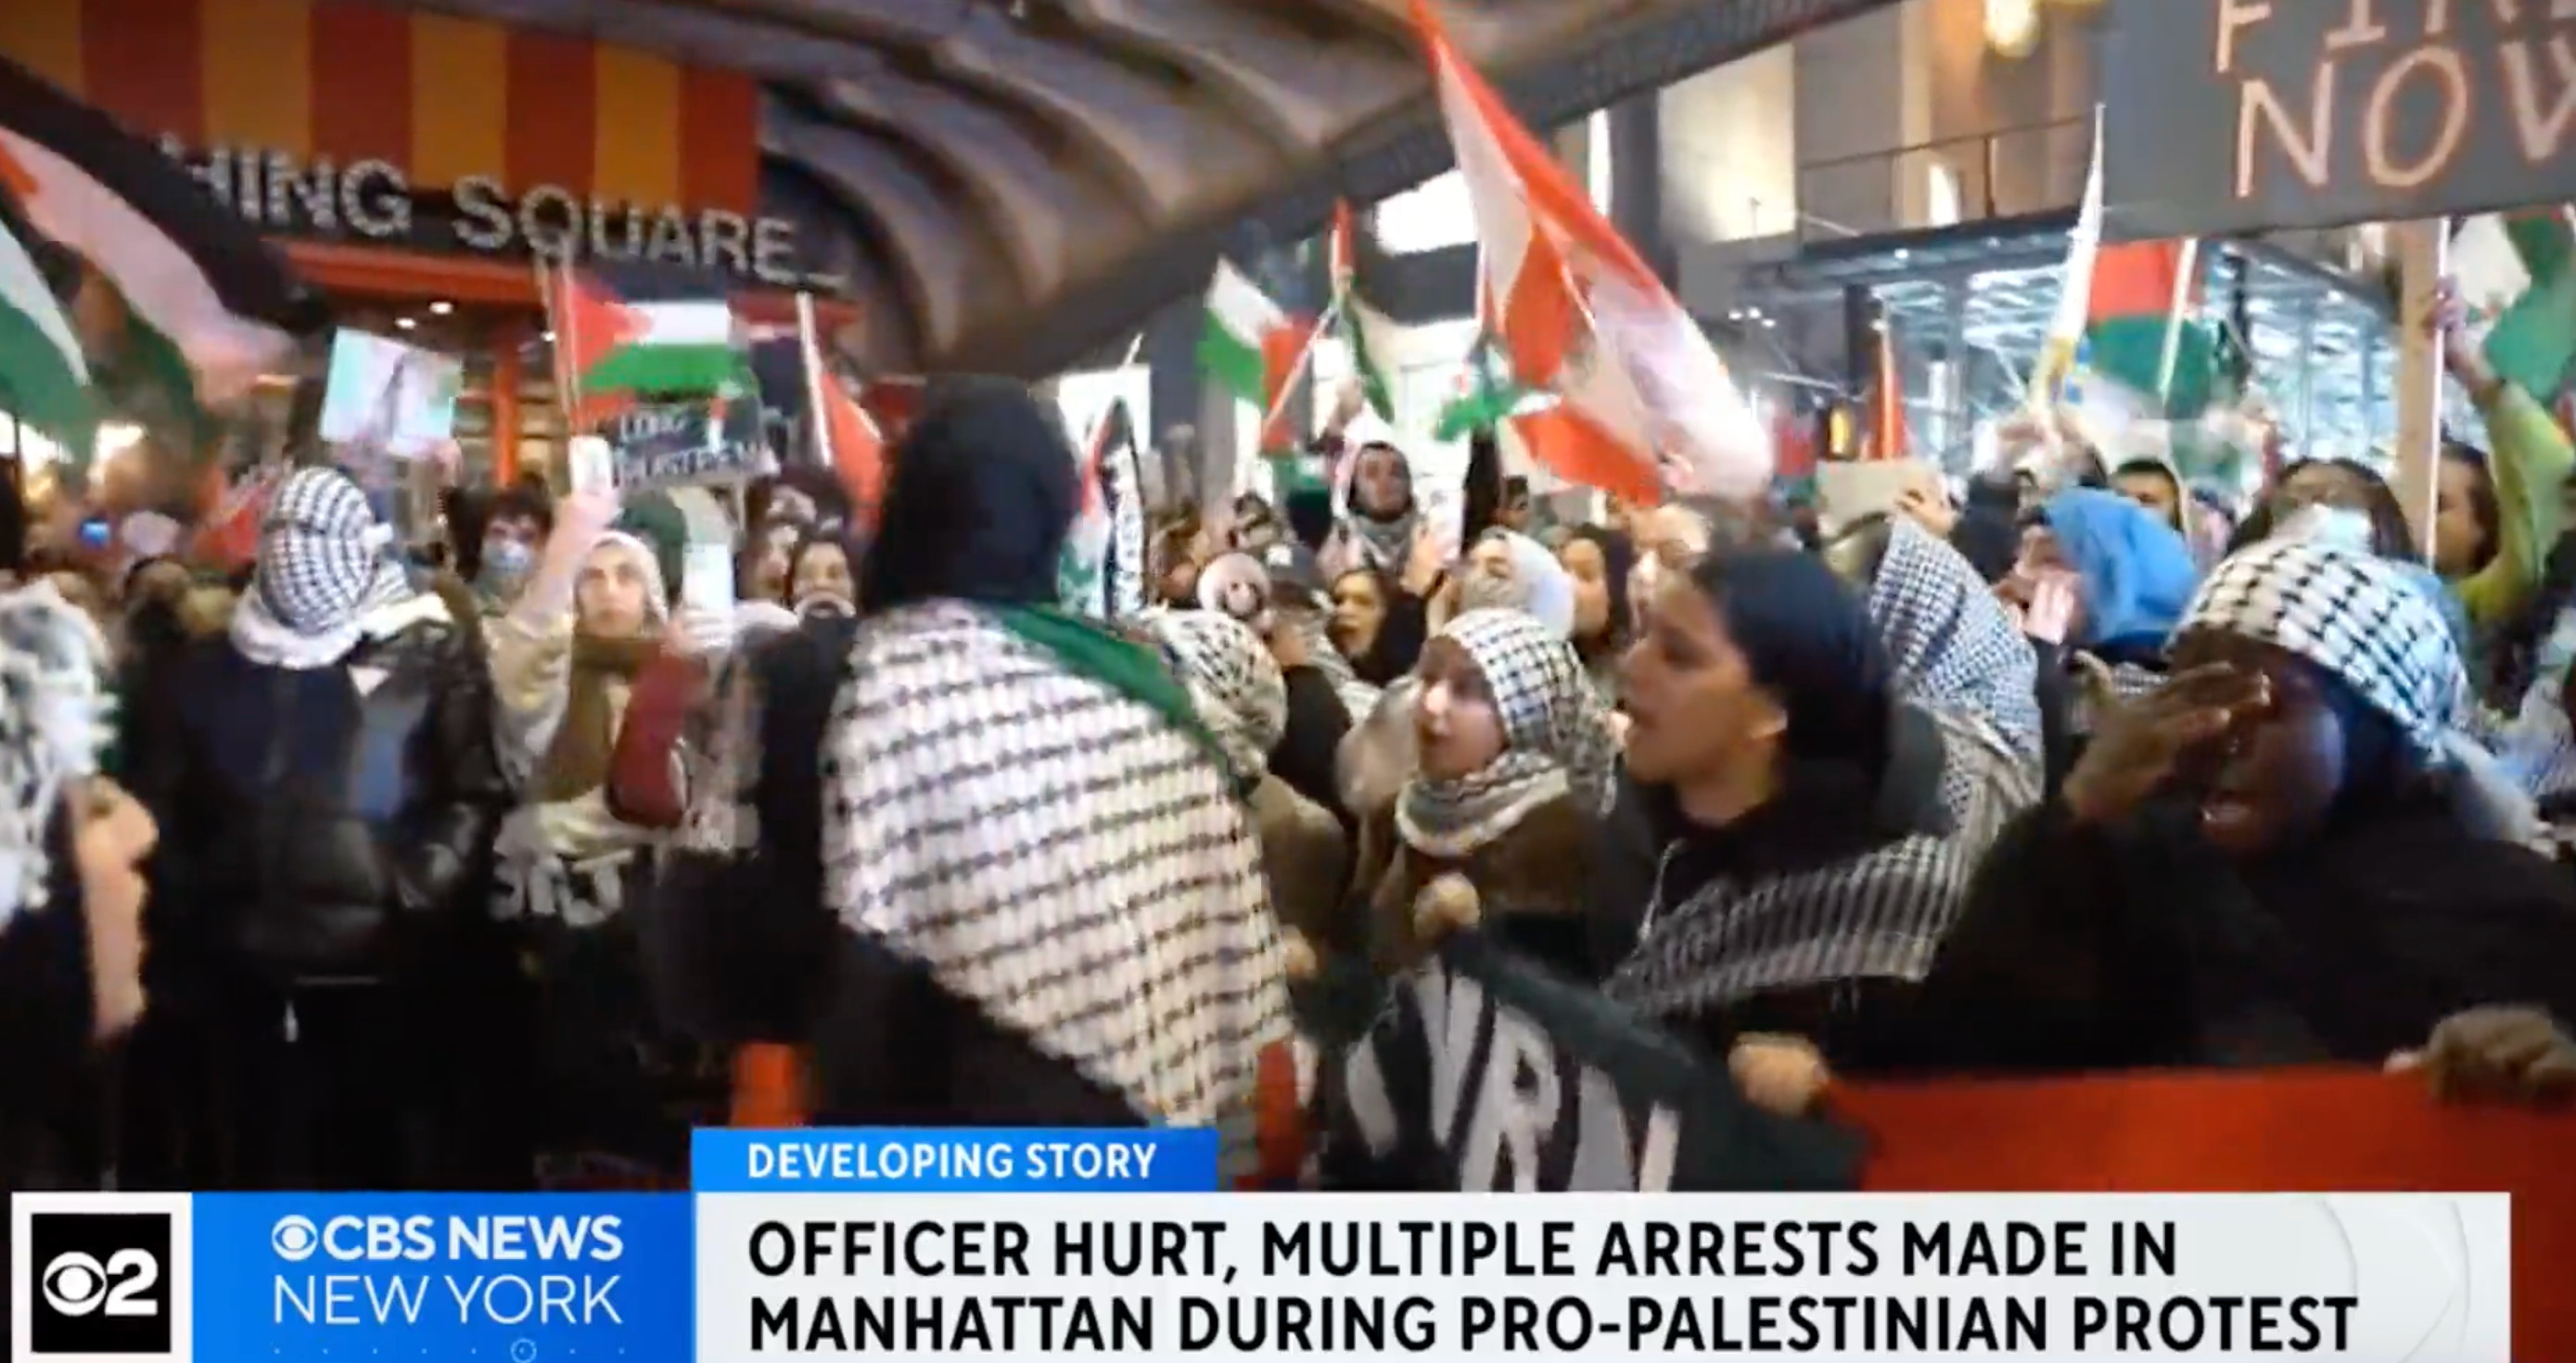 Pro-Palestinian protesters clashed with police during a Christmas Day rally in Manhattan